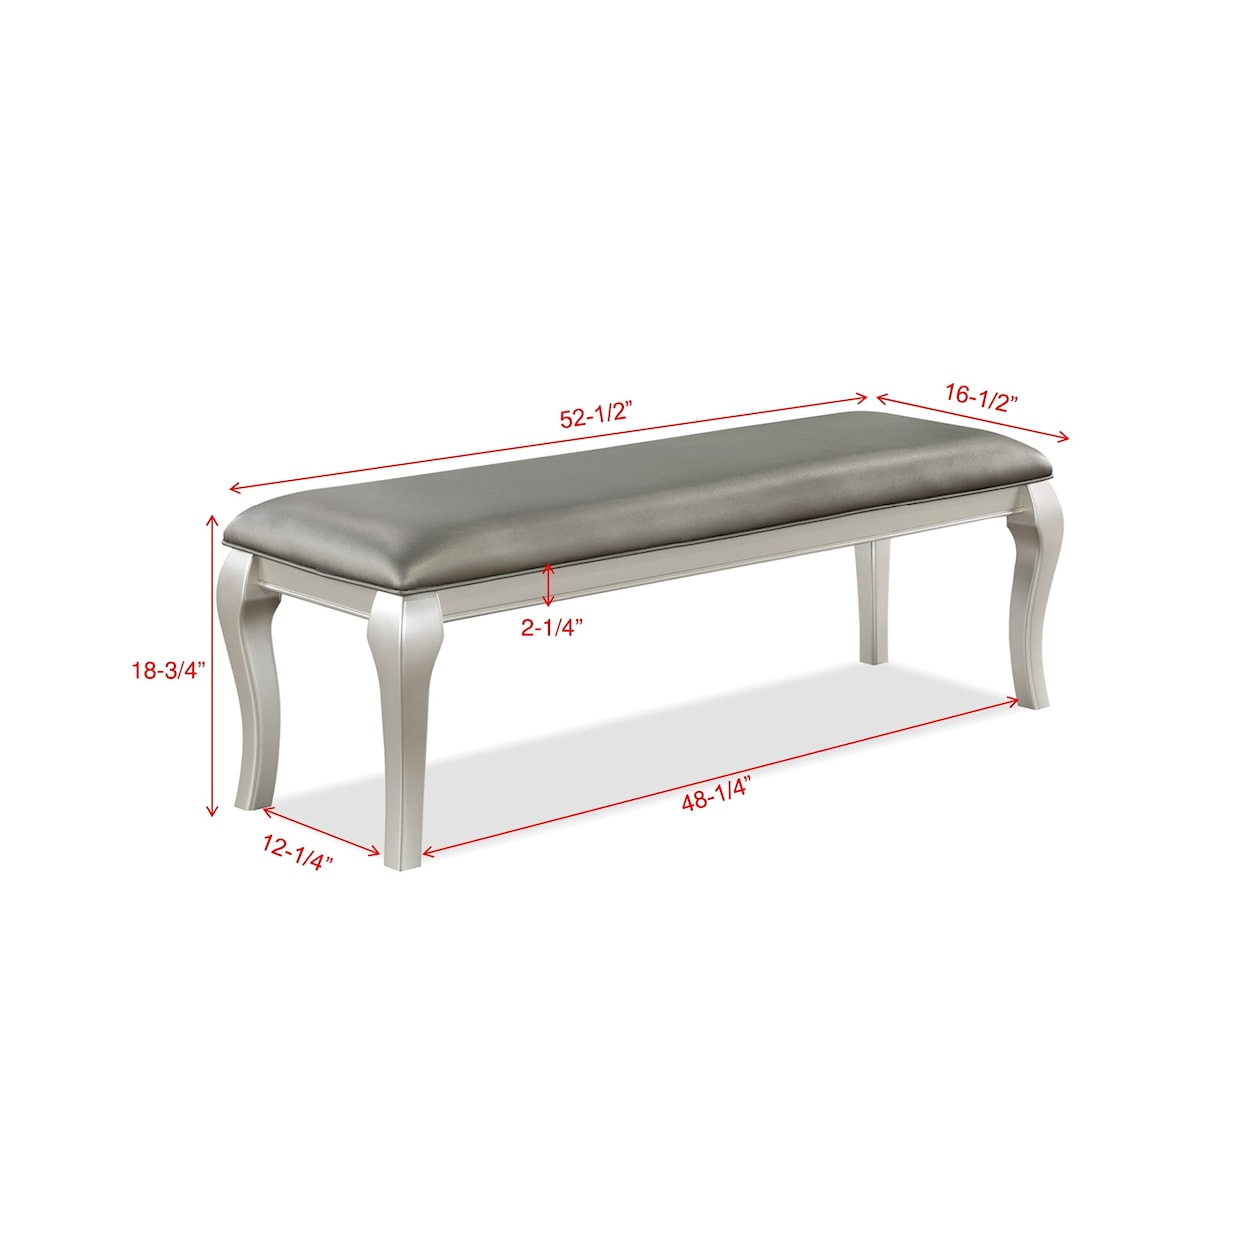 Crown Mark Caldwell Upholstered Dining Bench